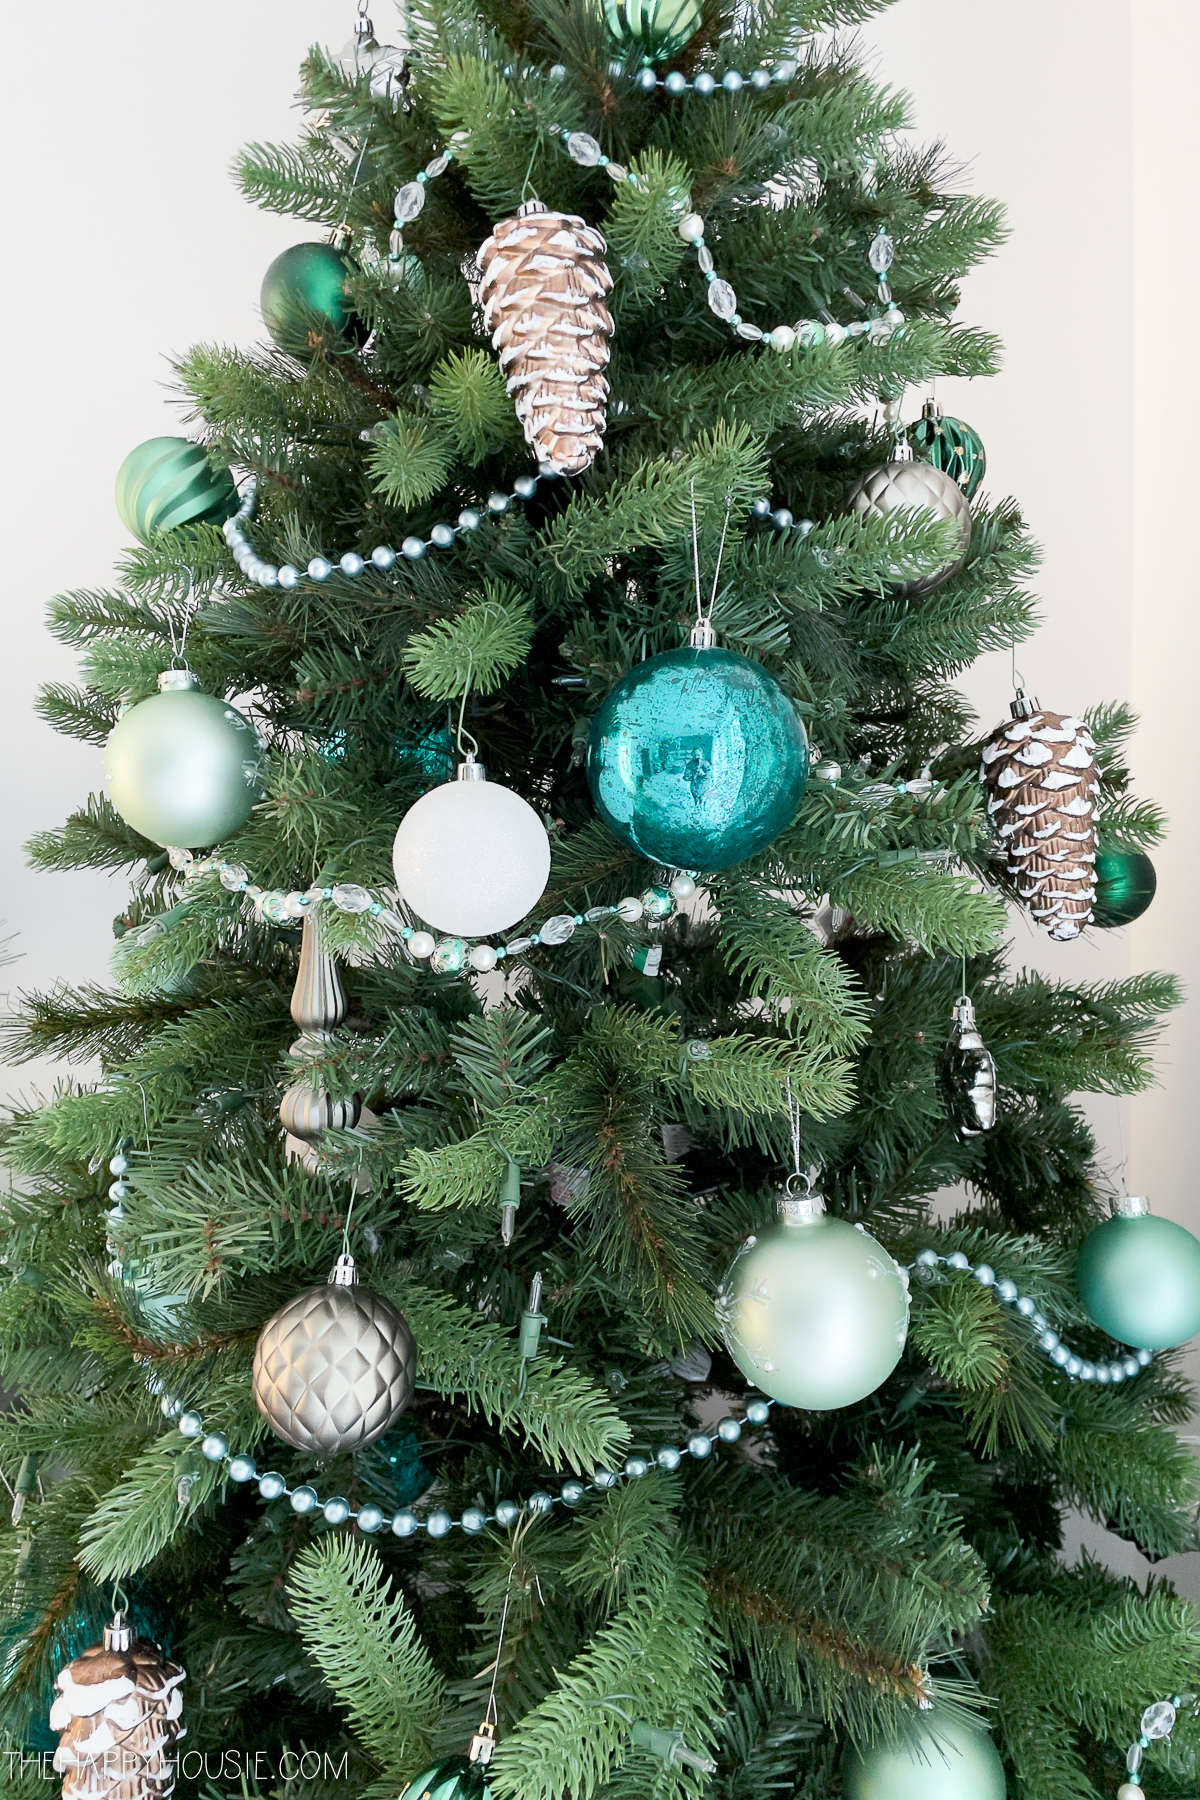 There are baubles on the tree.